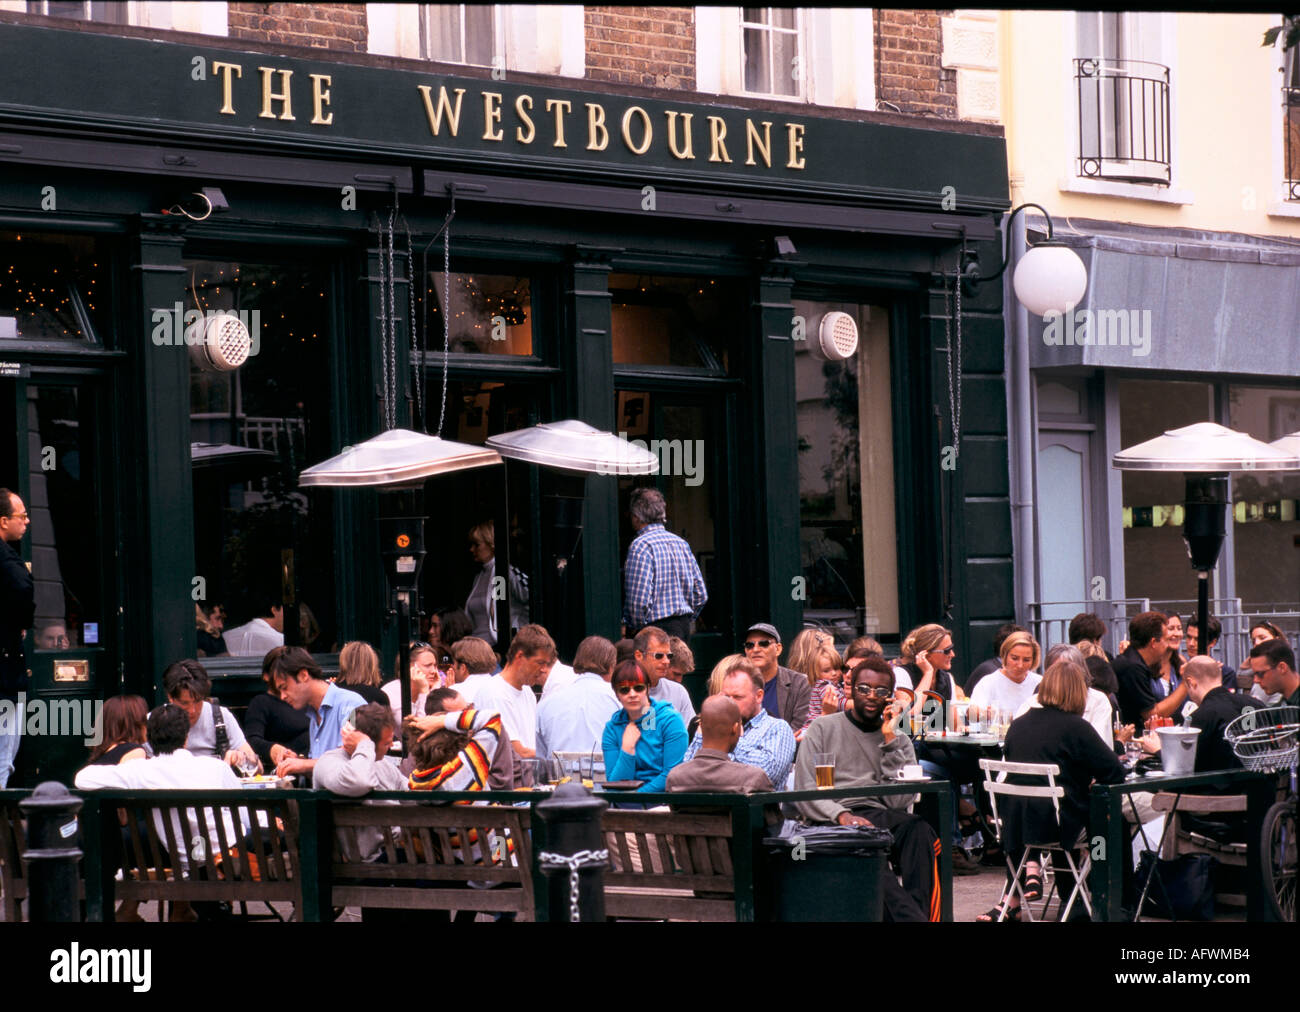 THE WESTBOURNE PUB NOTTING HILL GATE WEST LONDON CROWS OF PEOPLE HOMER SYKES Stock Photo